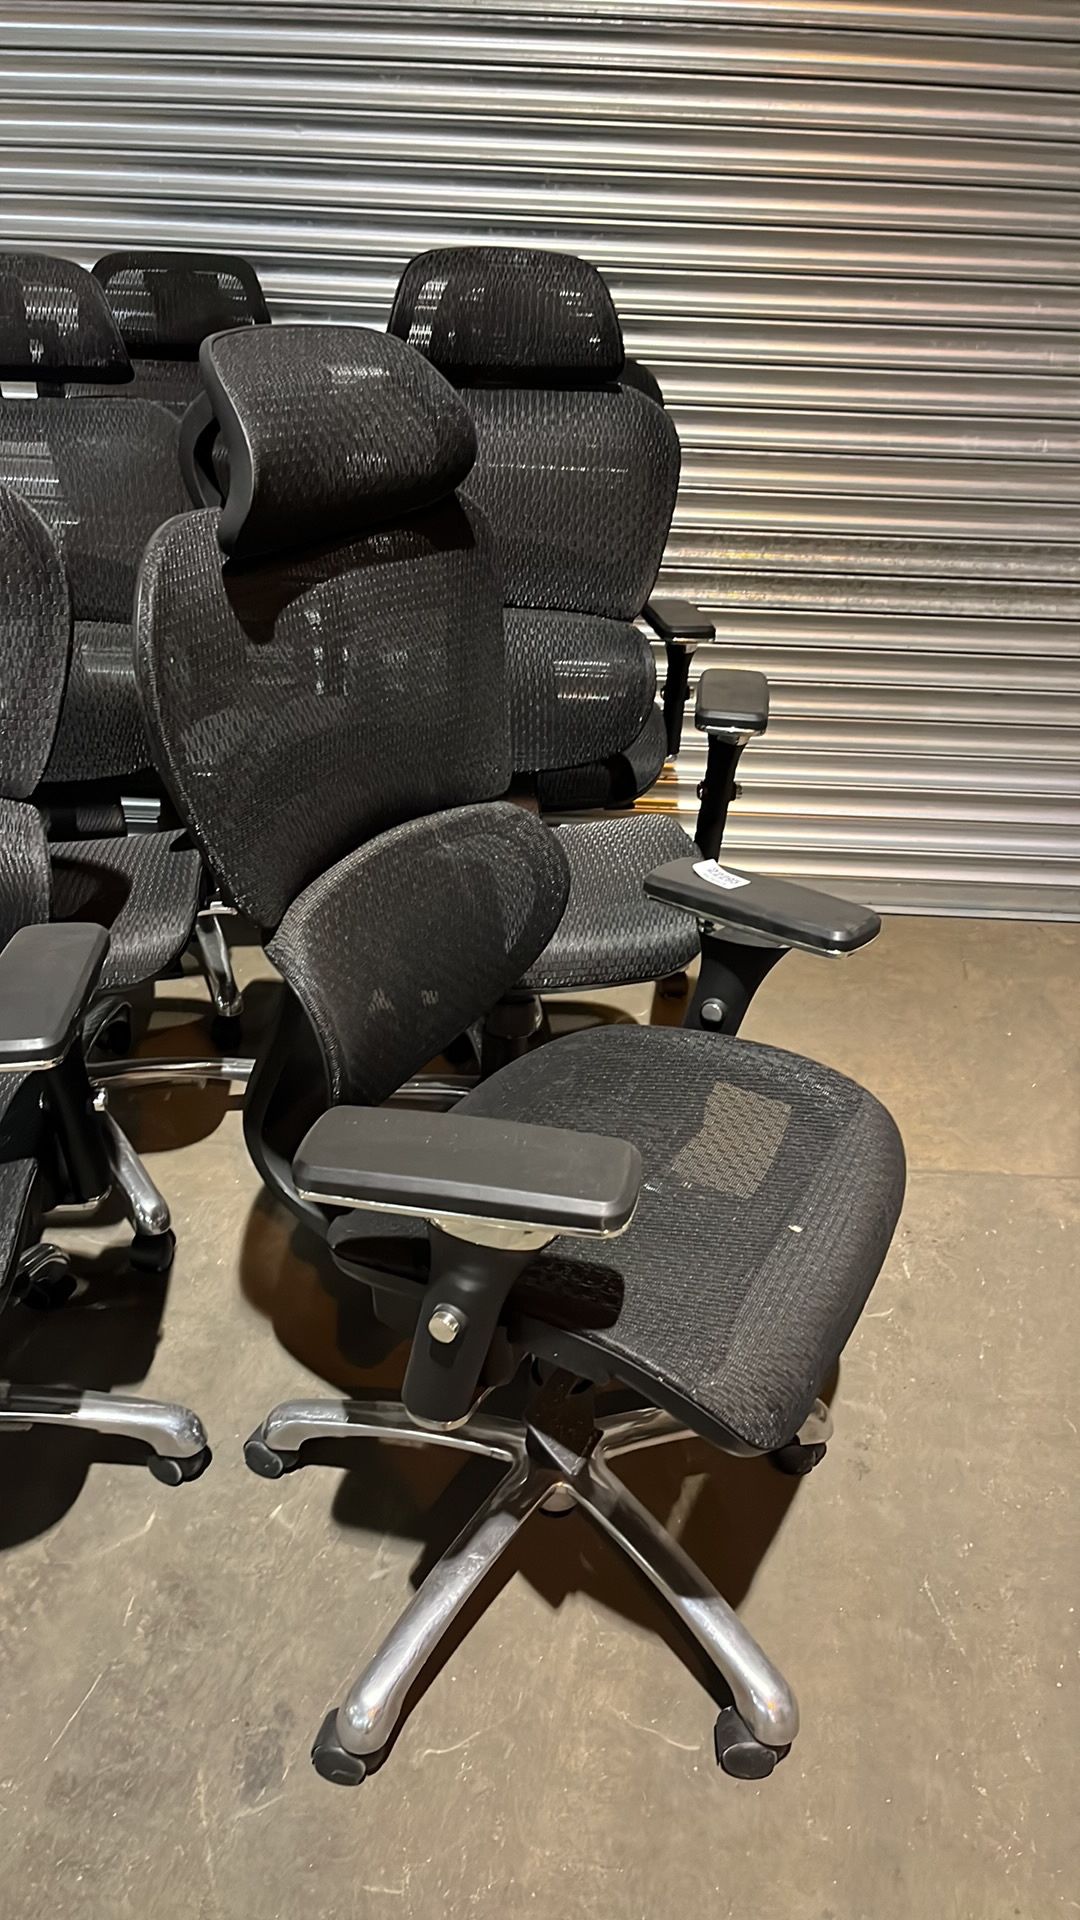 6 x Black Fabric Wheeled Office Chairs - Image 4 of 4